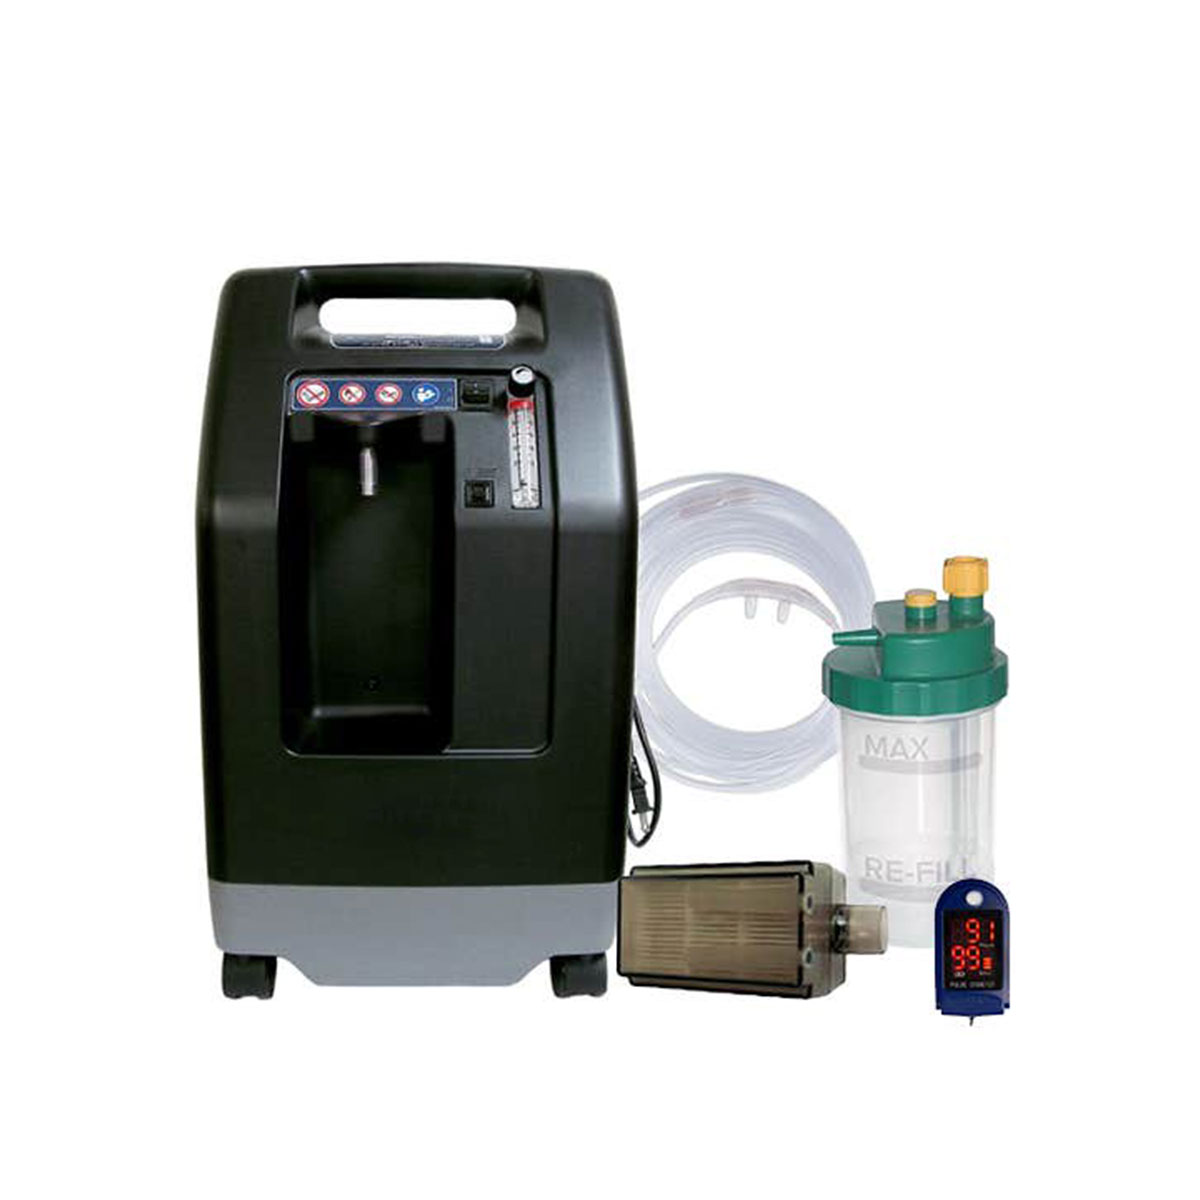 Devilbiss Oxygen Concentrator 5 LPM On Sale Suppliers, Service Provider in Anand lok